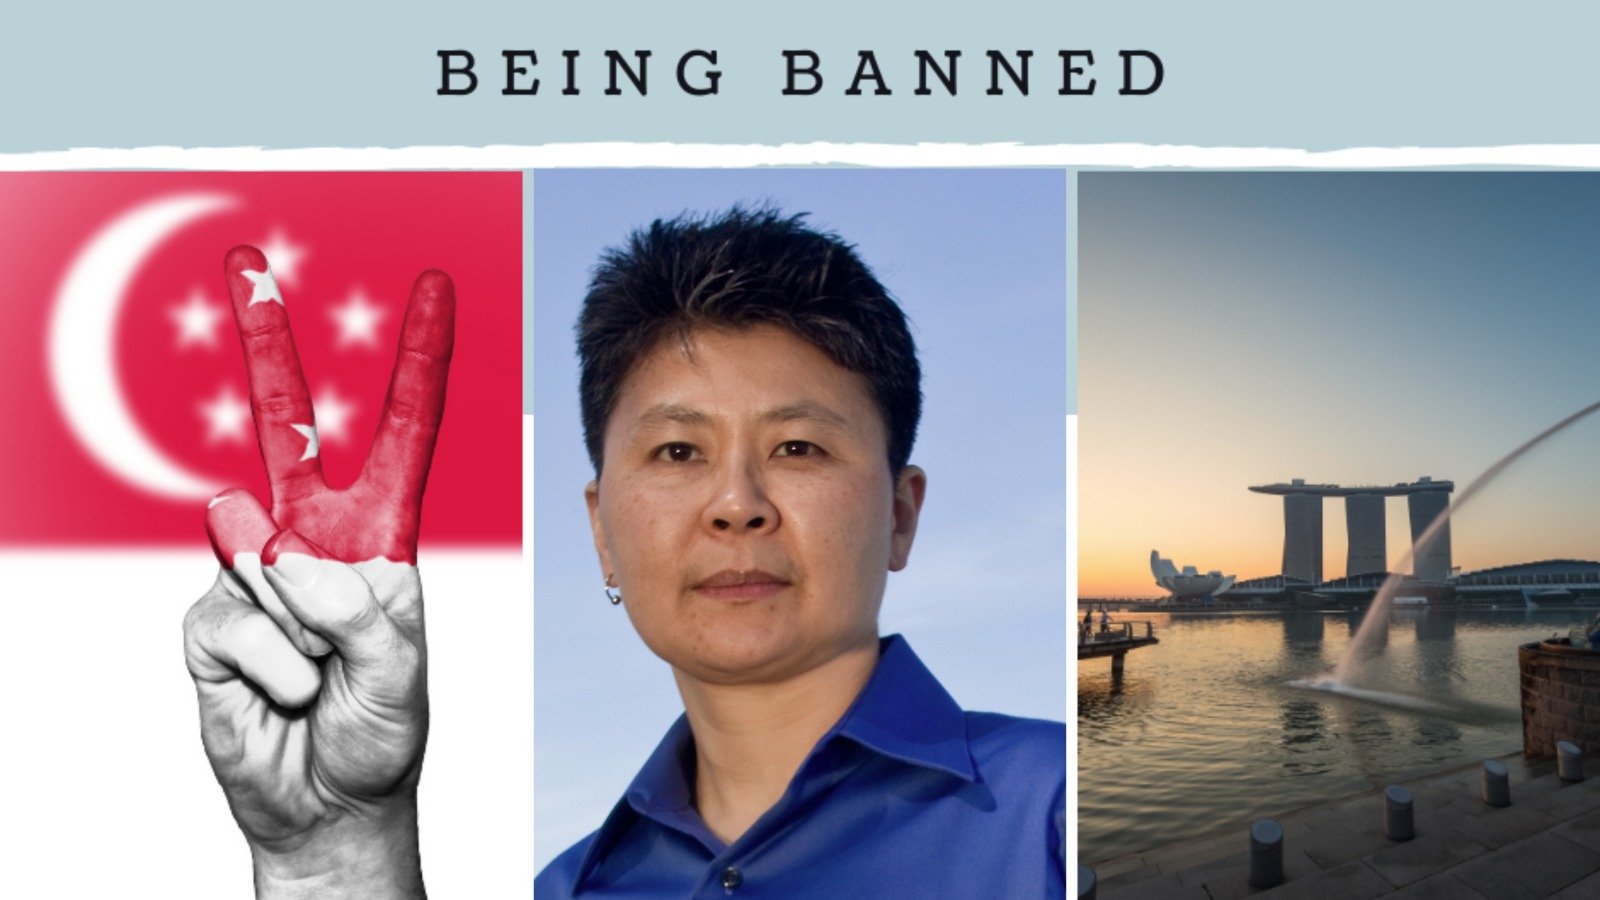 At the top, black text on a pale blue-gray background reads Being Banned. On the left is a photo of the Singapore flag and a hand holding up their index and middle fingers in a peace sign. In the center is a portrait photo of Madeleine Lim, an Asian woman with medium-brown skin and short black hair, wearing a blue collared shirt. On the right is a photo of Marina Bay in Singapore at sunset.